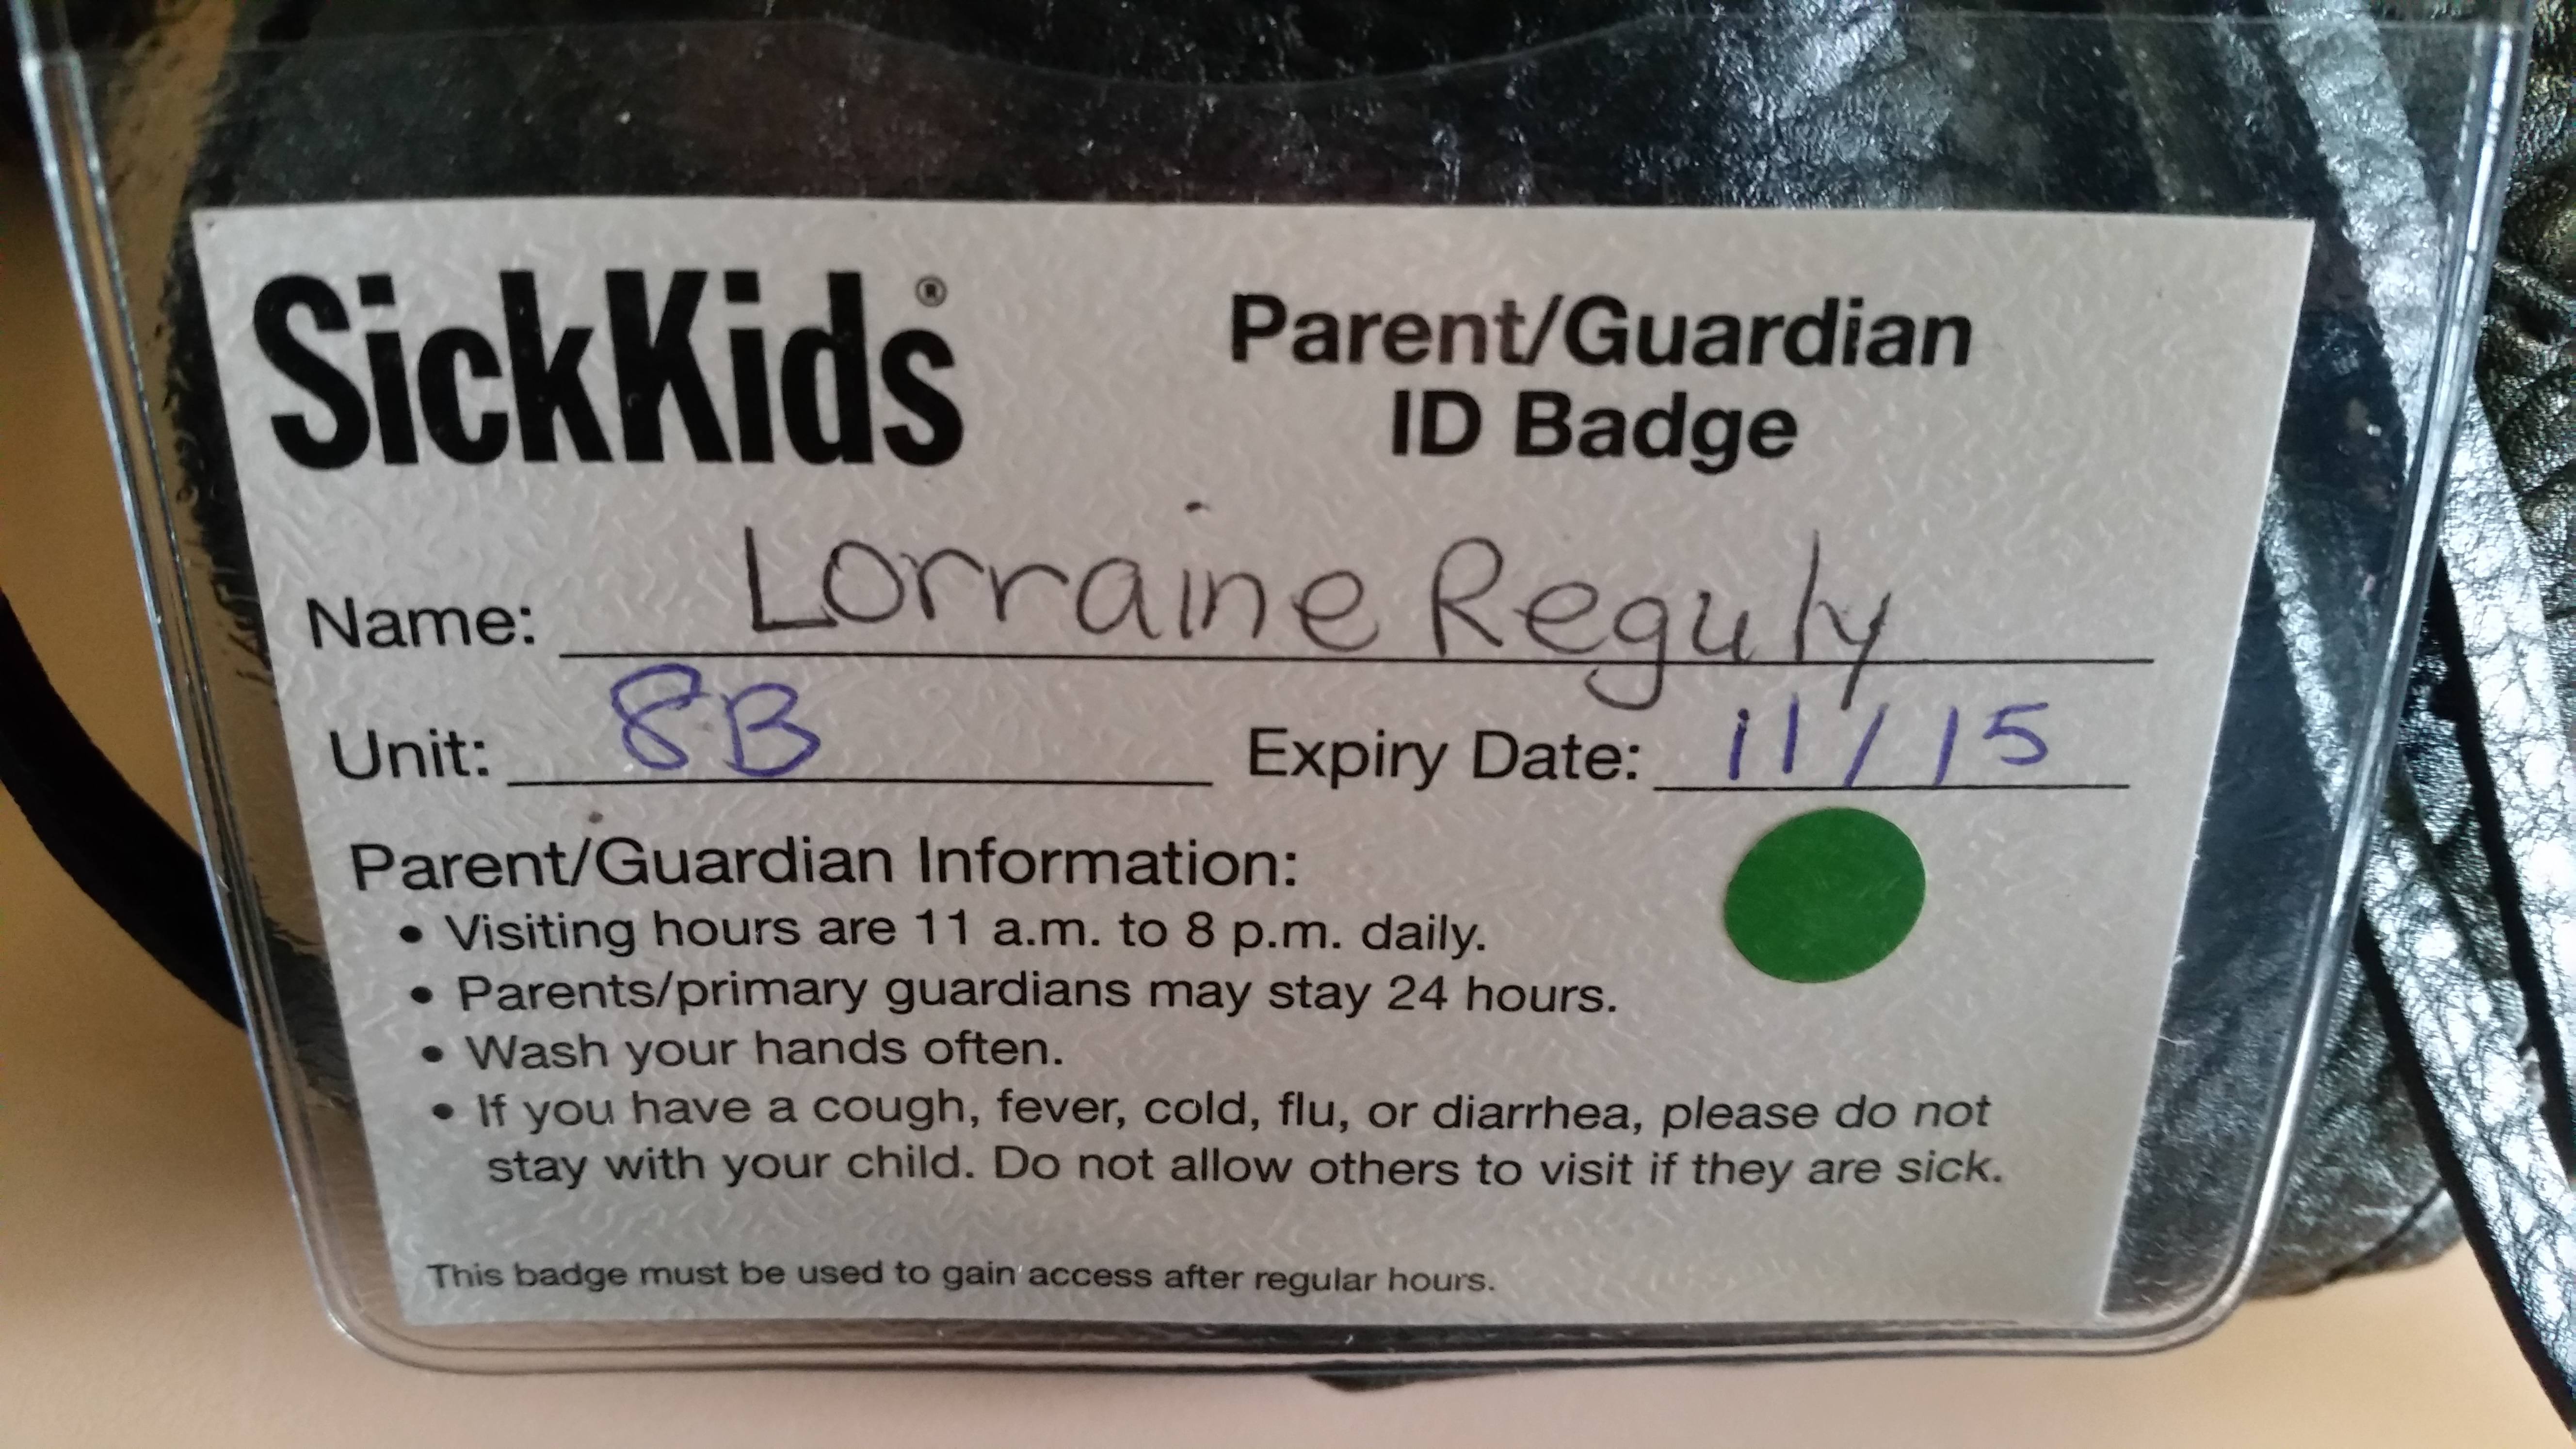 My visitor ID badge at SickKids